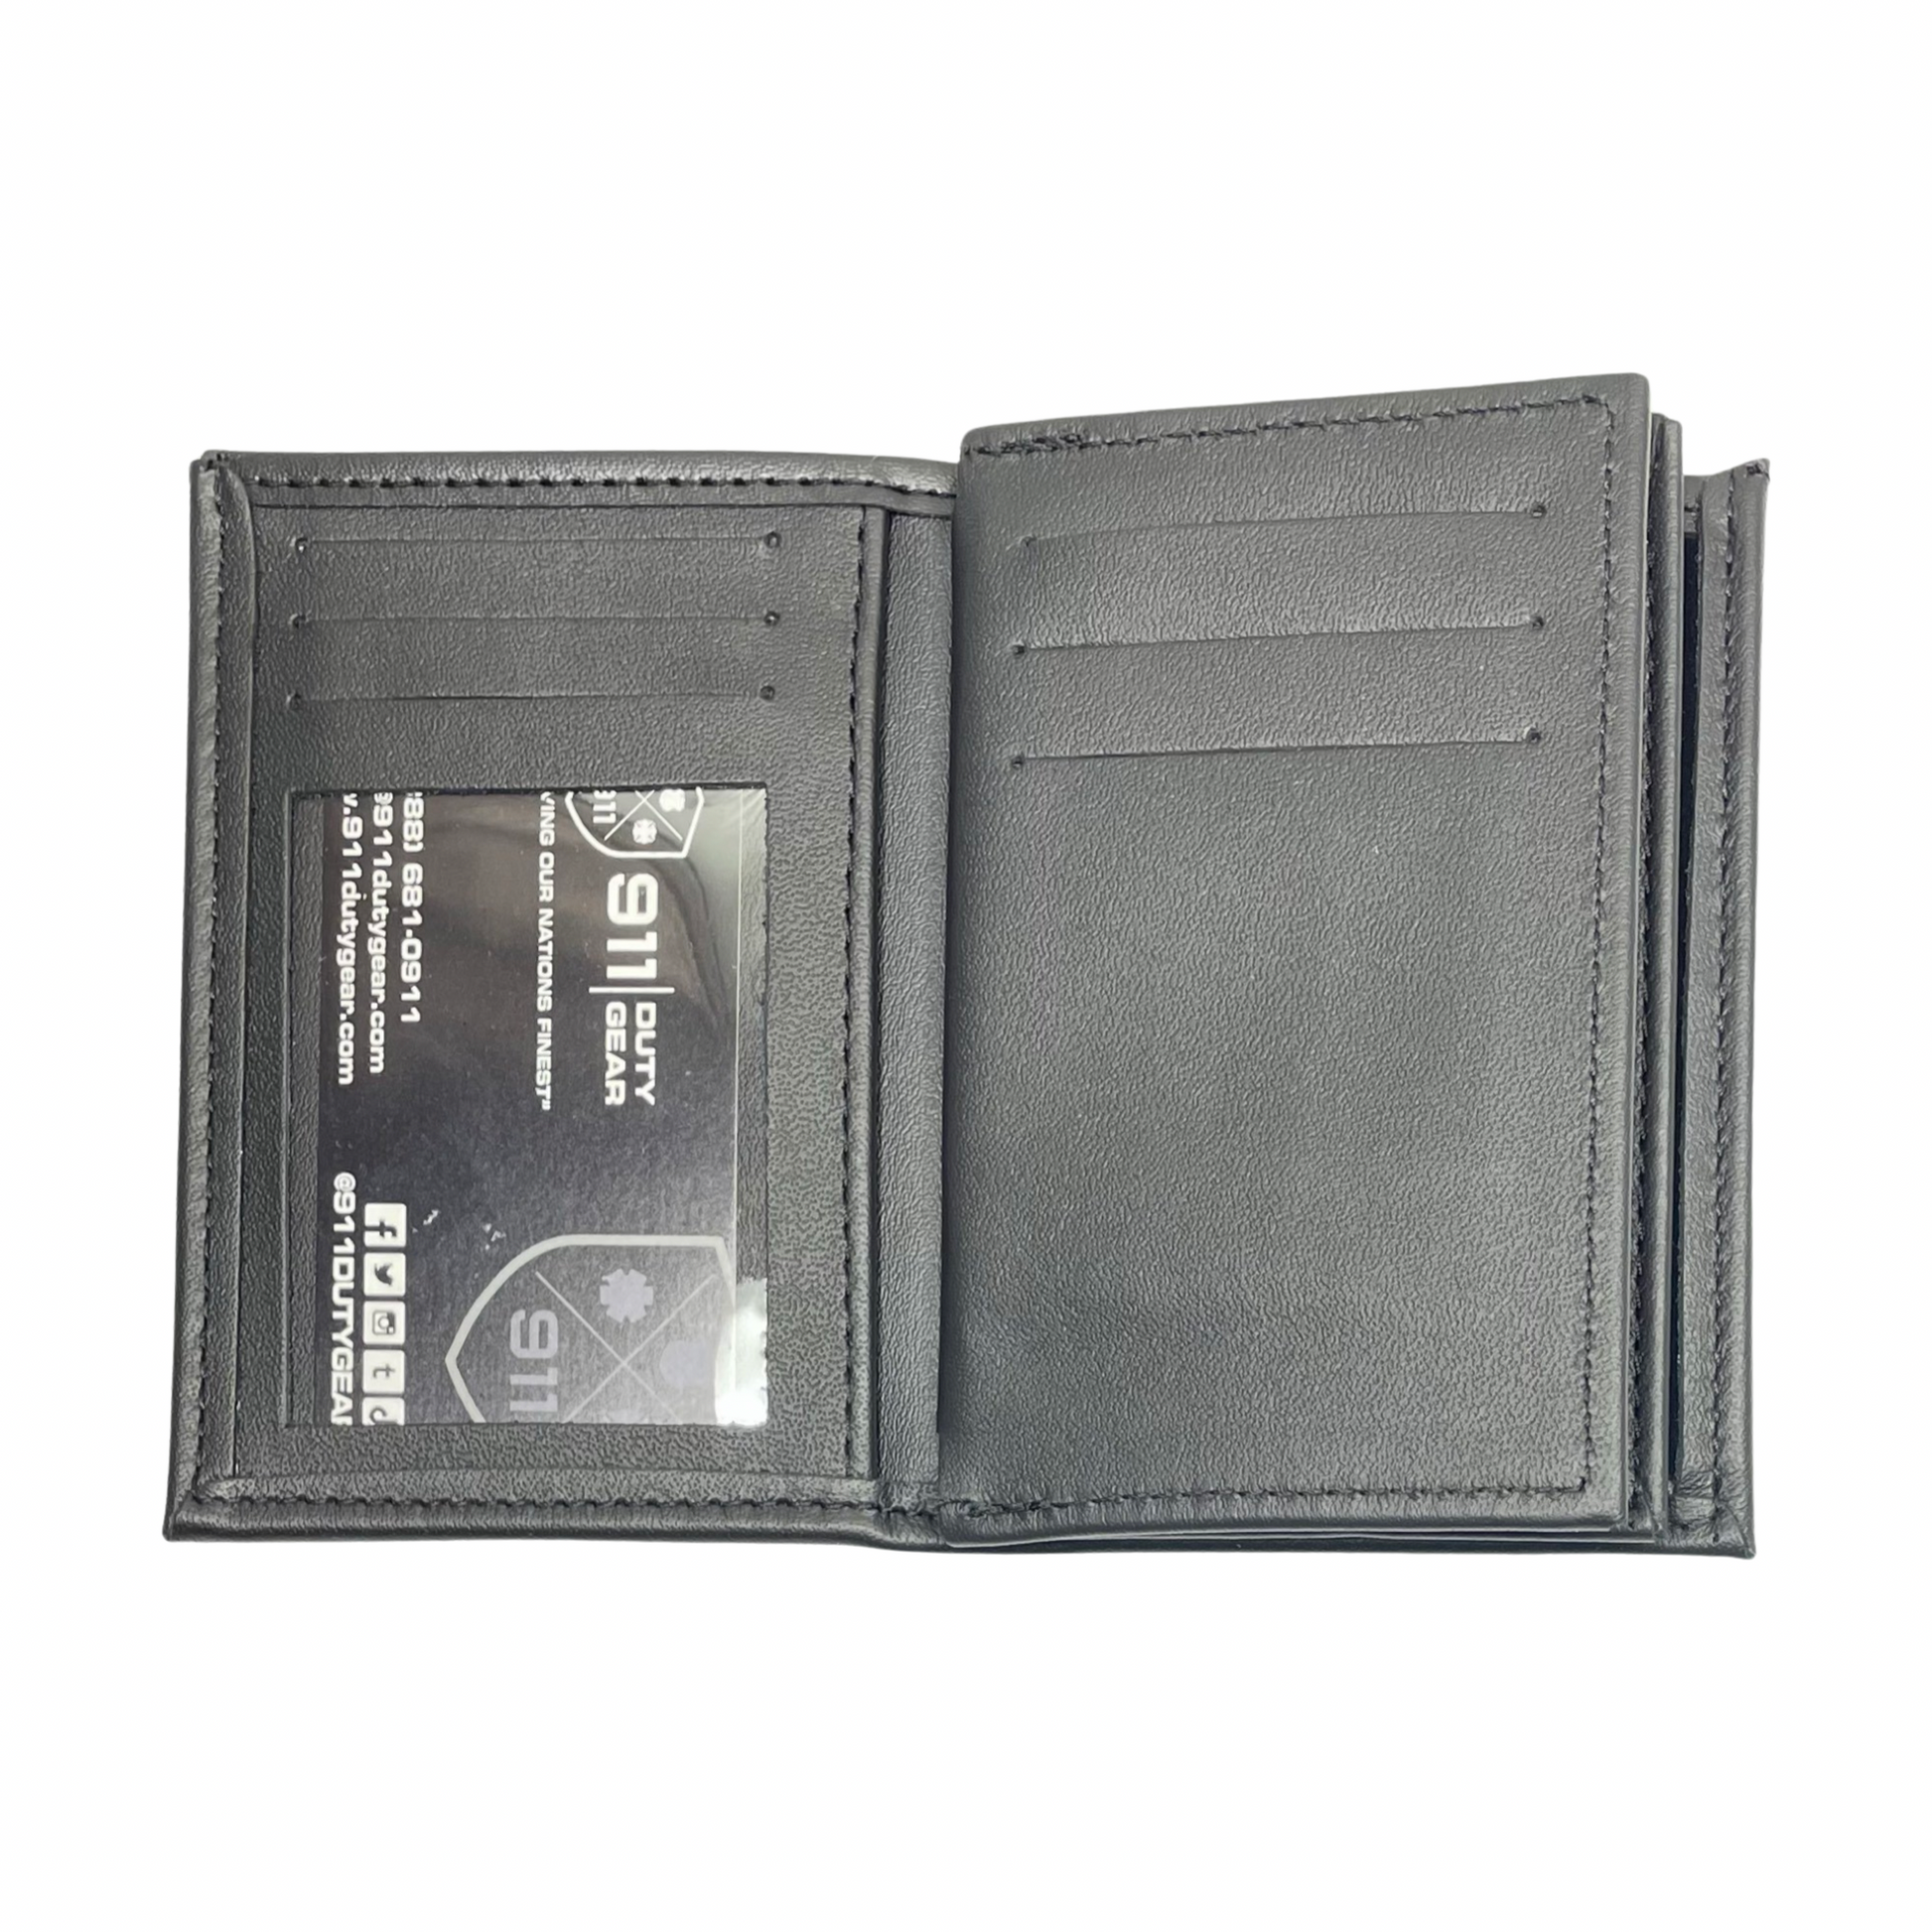 CBP | U.S. Customs and Border Protection Officer Horizontal Bifold Double ID Credential & Hidden Badge Wallet-Perfect Fit-911 Duty Gear USA